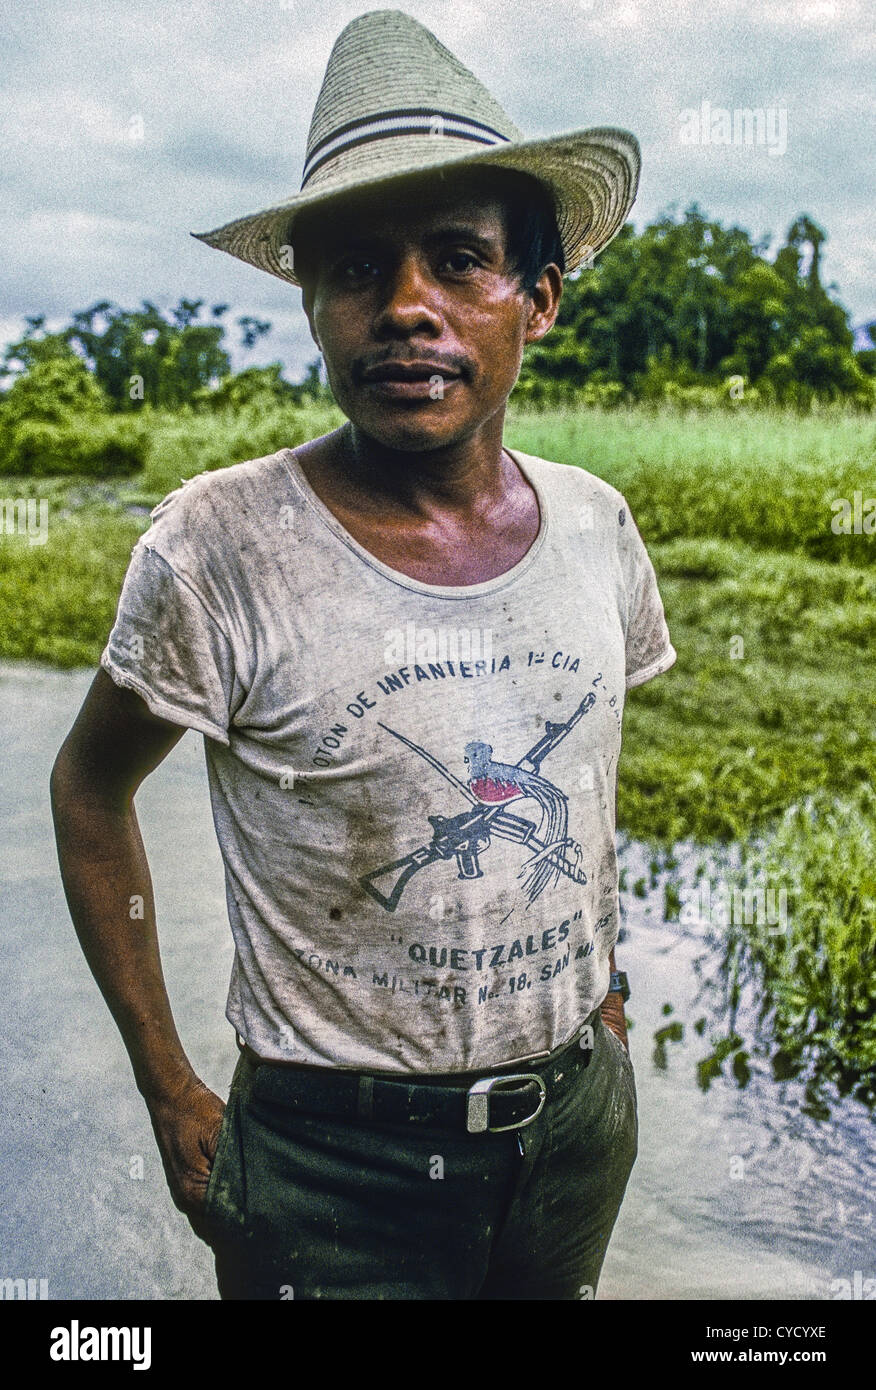 Guatemalan Kekchi man wearing the t-shirt of an army infantry division, Quetzales, in the village of Chinebal on Lake Isabel. Stock Photo